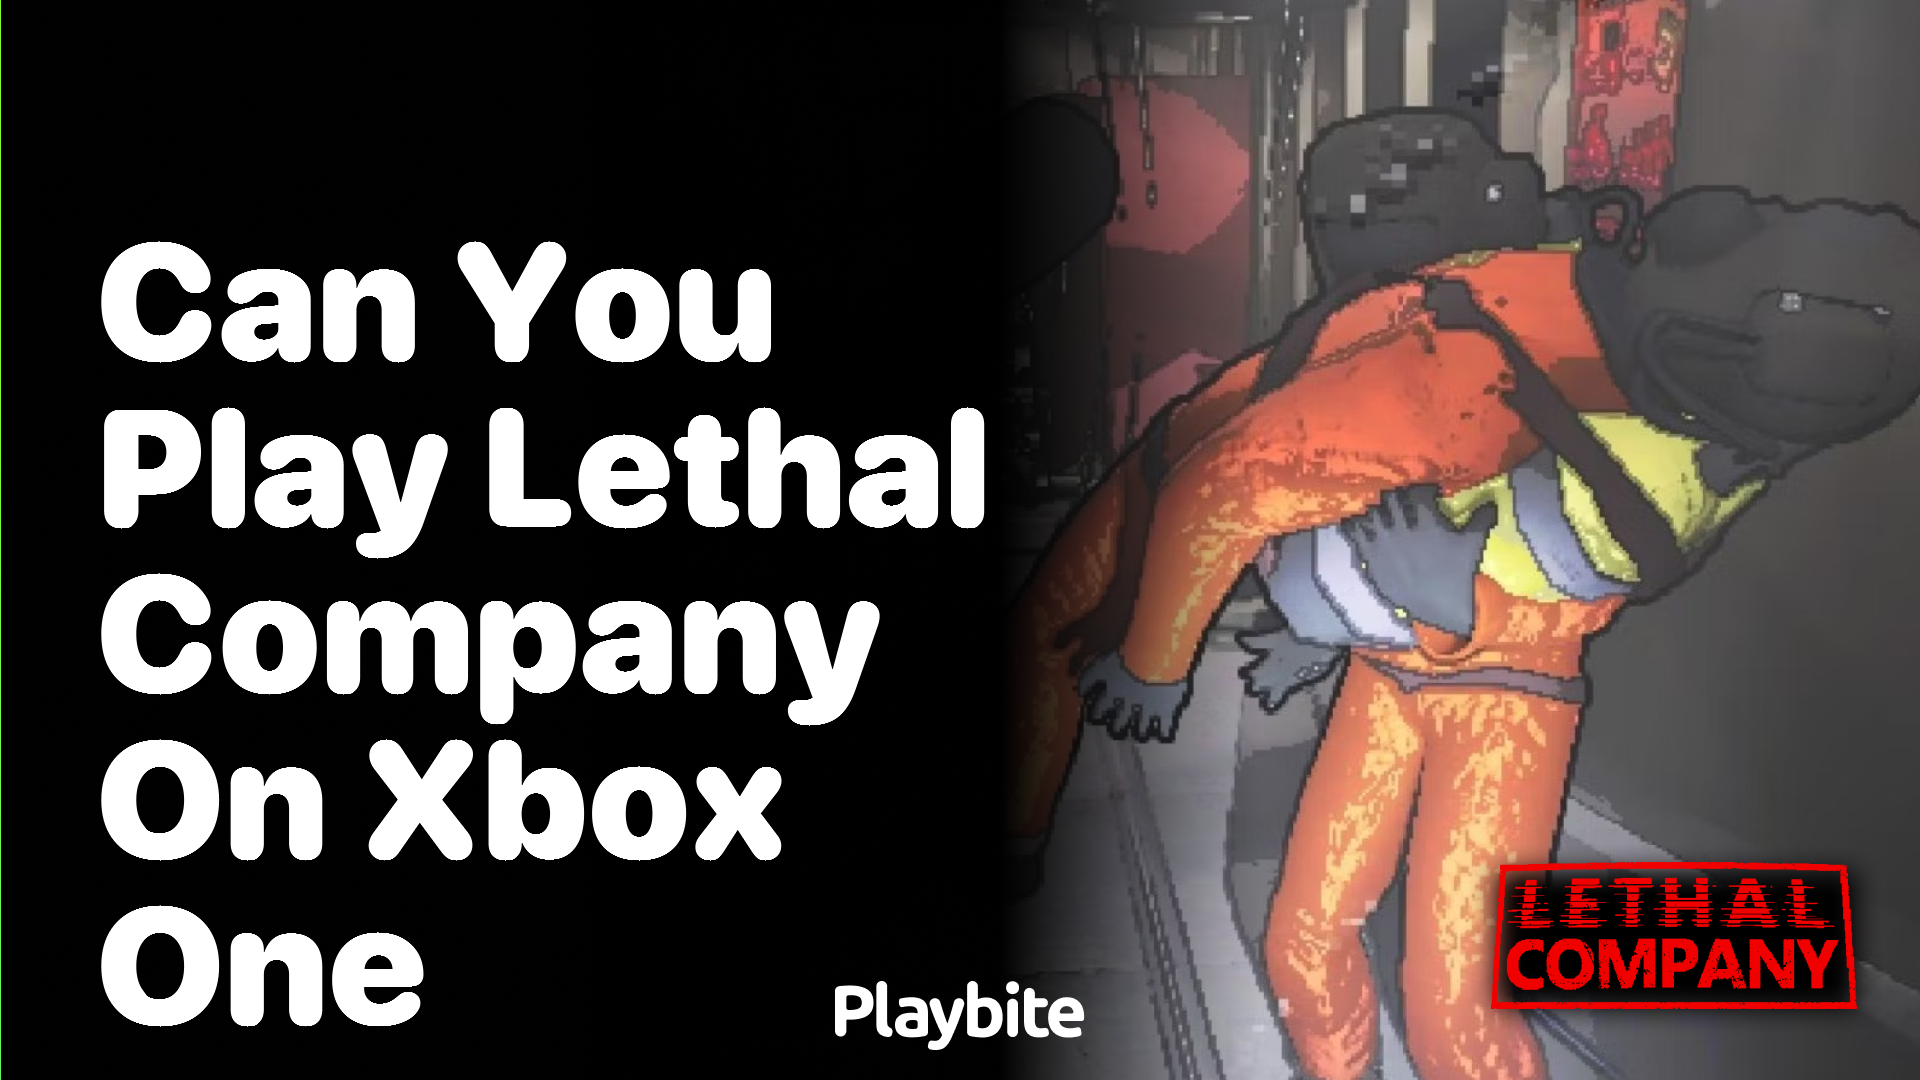 Can You Play Lethal Company on Xbox One?